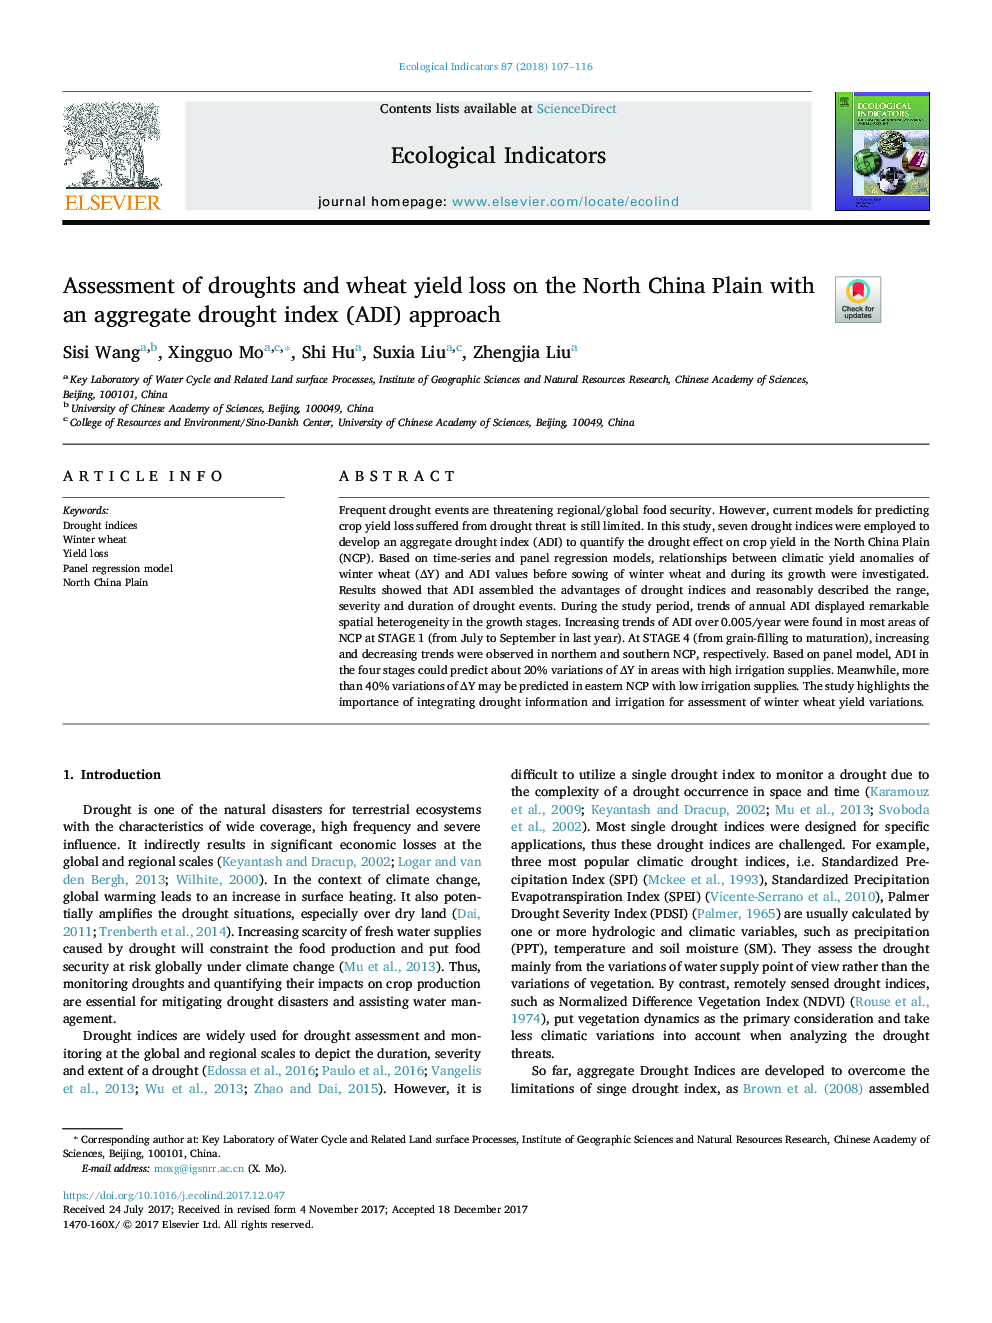 Assessment of droughts and wheat yield loss on the North China Plain with an aggregate drought index (ADI) approach